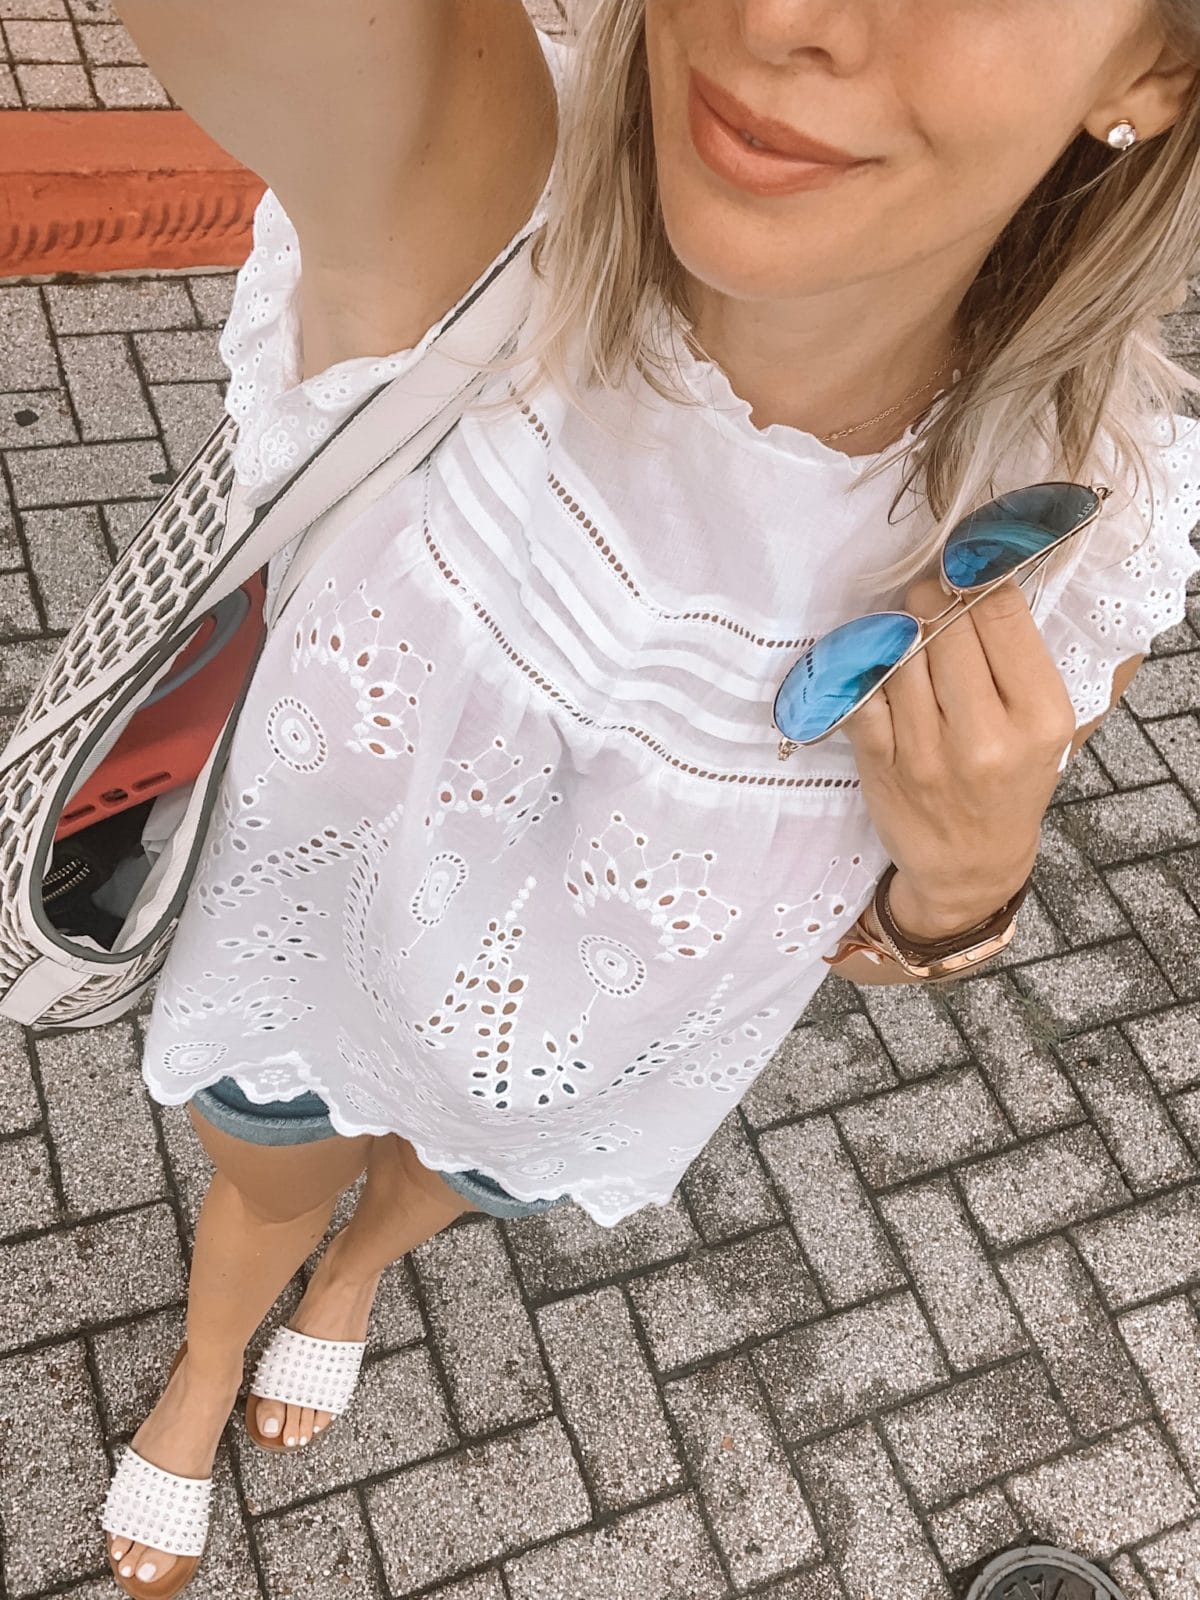 48 Hours in Galveston - Amazon Eyelet Top with Steve Madden studded sandals